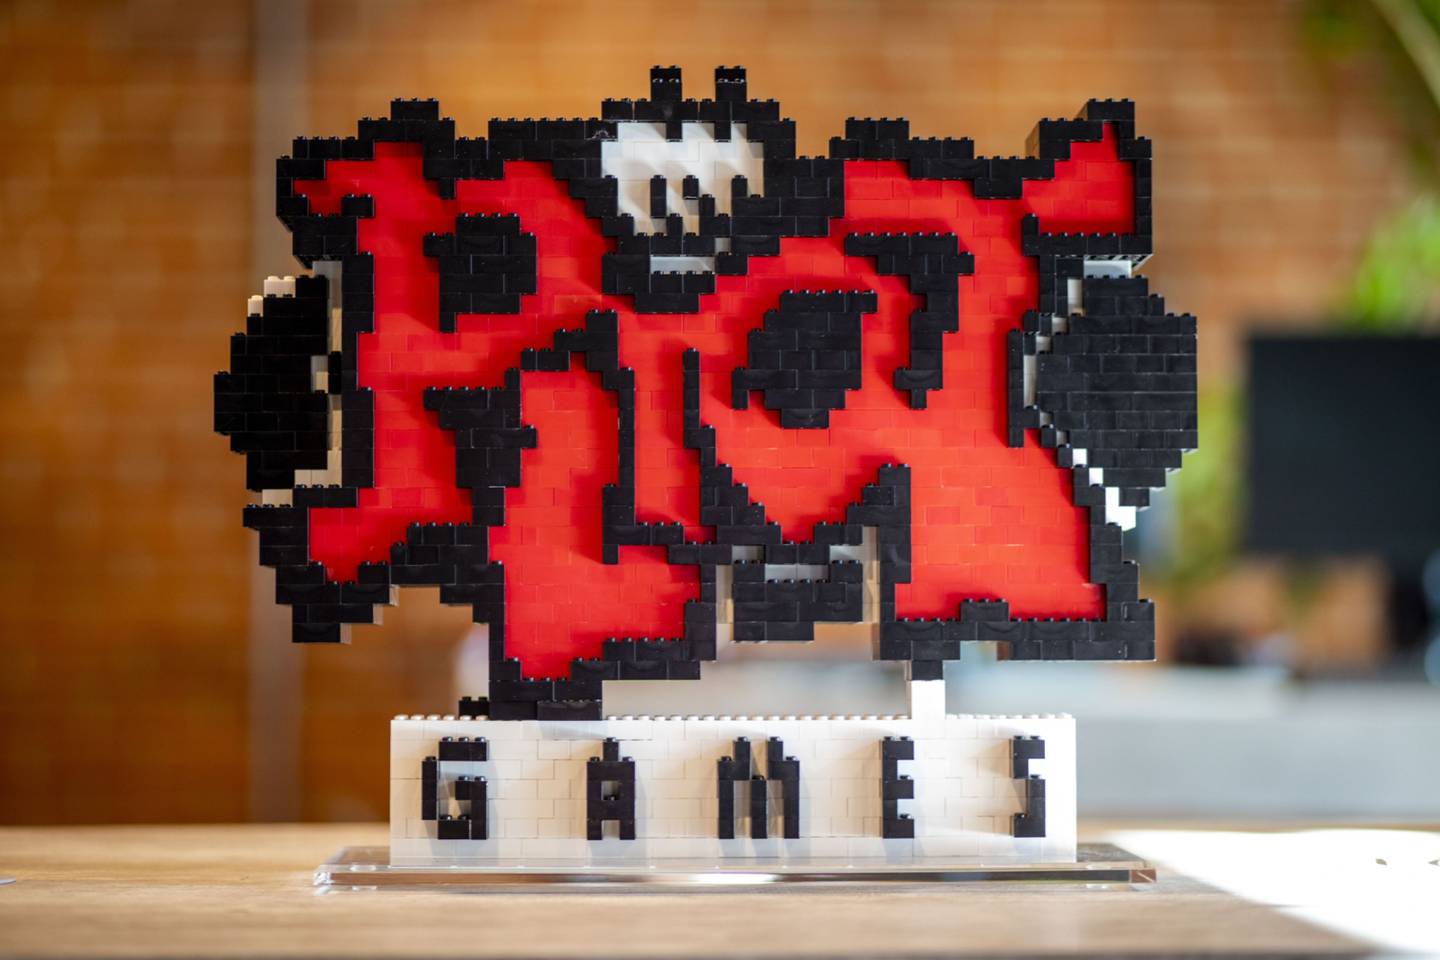 Signage is displayed on a table at the Riot Games Inc. campus in Los Angeles, California, U.S.